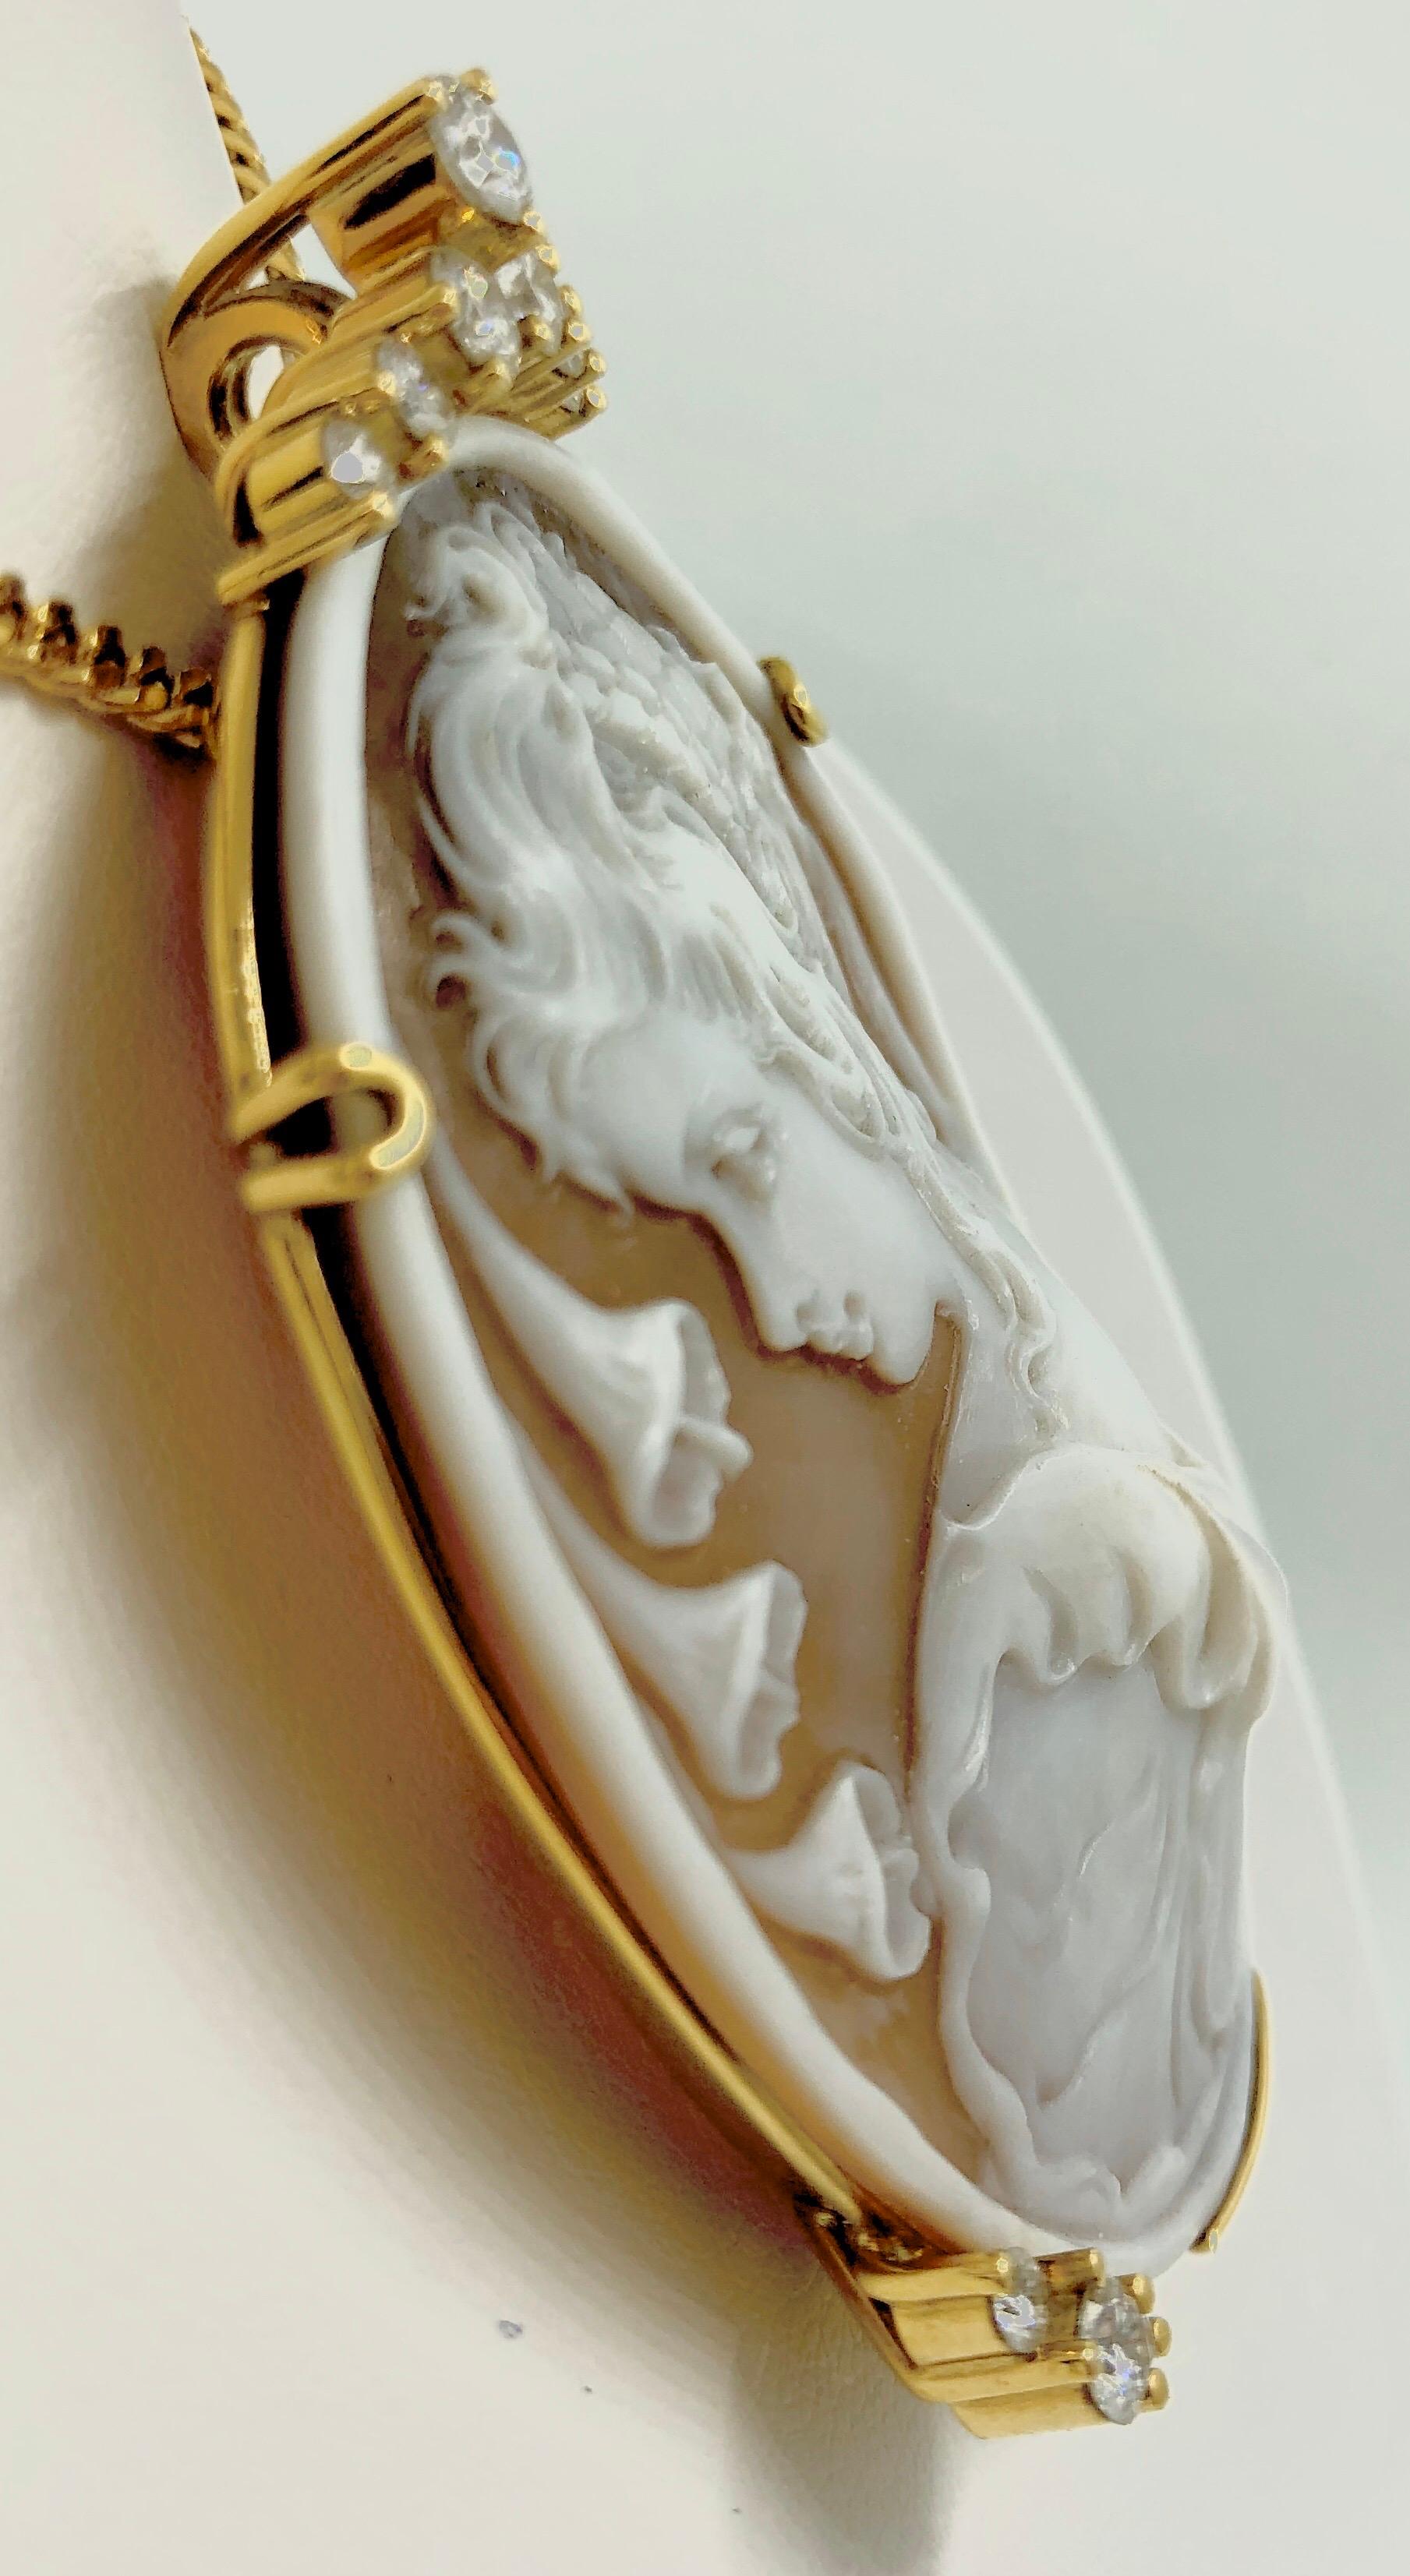 This romantic yellow gold pendant features a shell cameo depicting a lady's profile hand-carved and signed "IMPERATRICE", surrounded by 13 brilliant cut diamonds. The pendant is a G.MINNER unique creation entirely handmade.
Total Diamonds